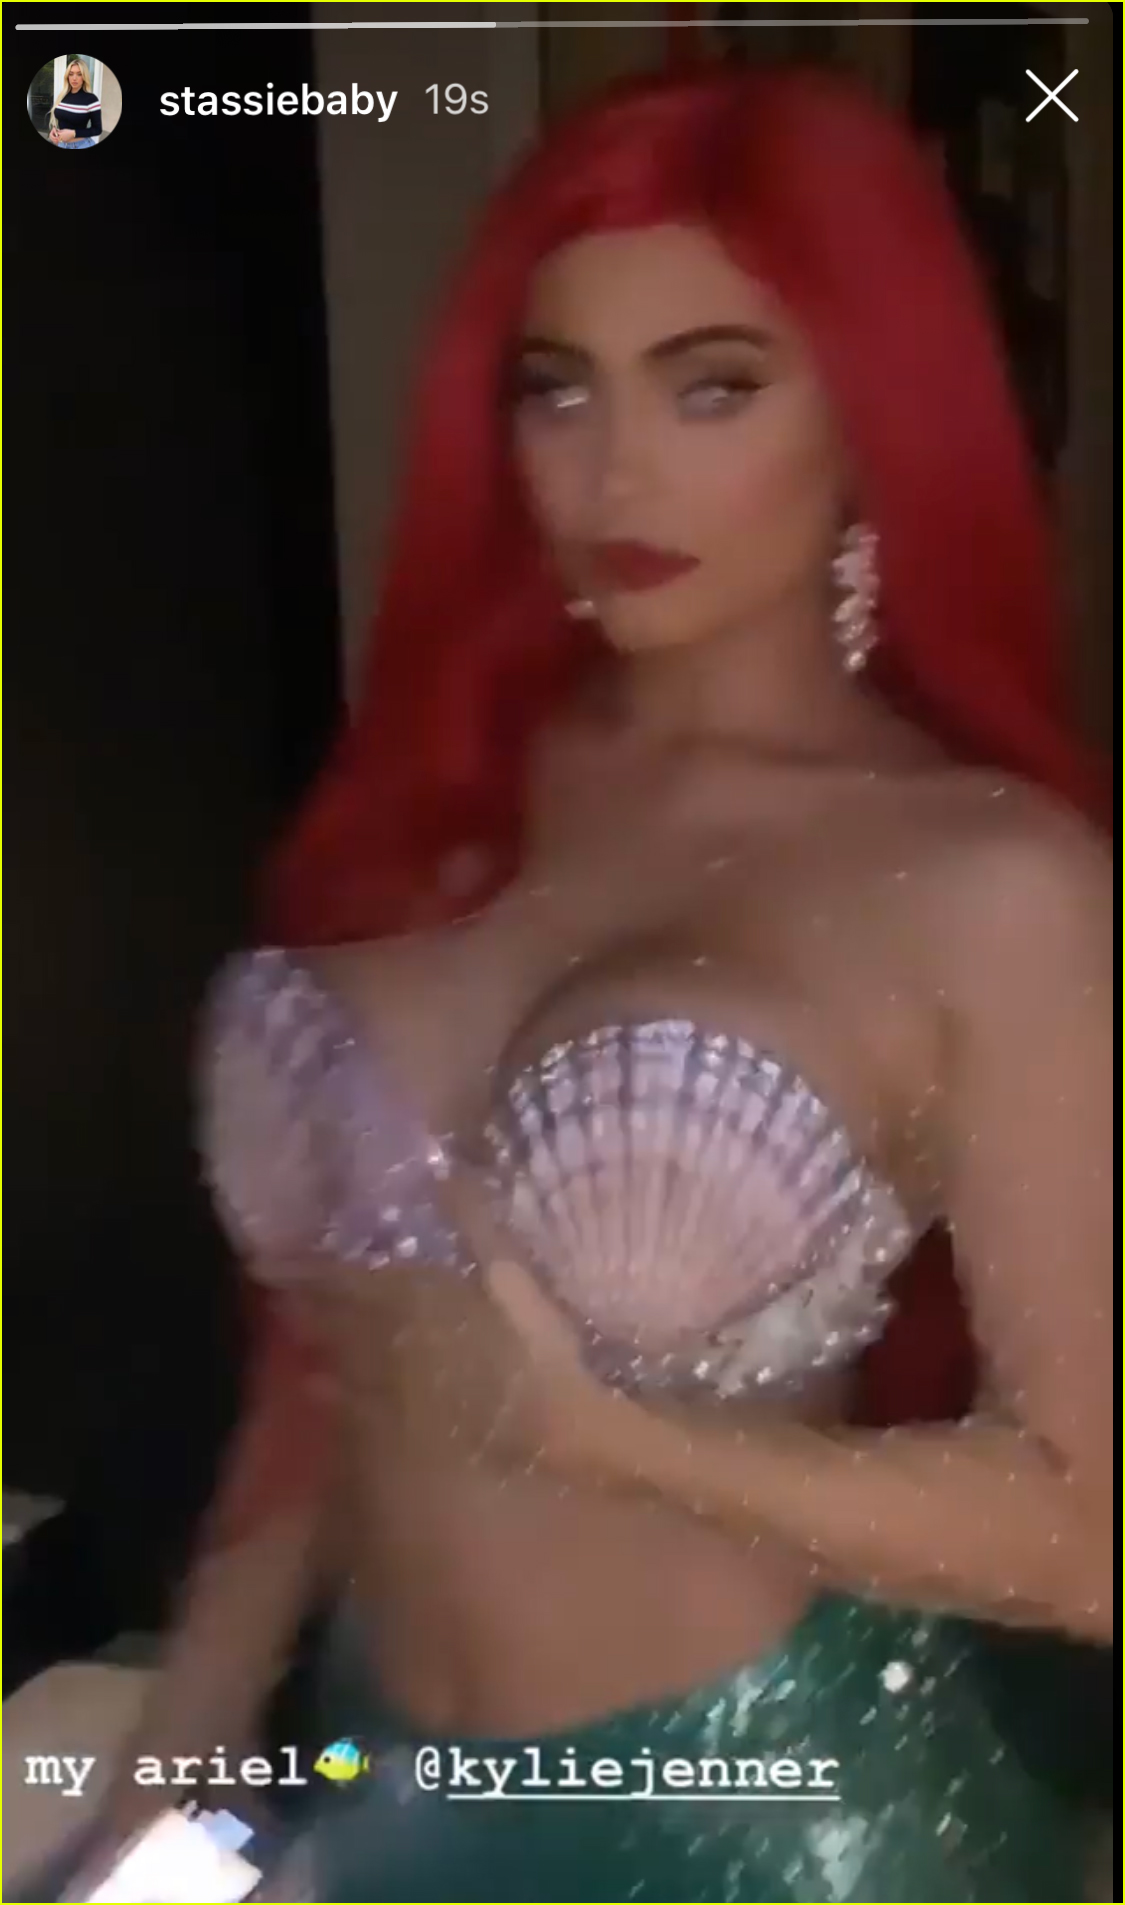 kylie jenner dresses as super sexy ariel from the little mermaid for halloween 05